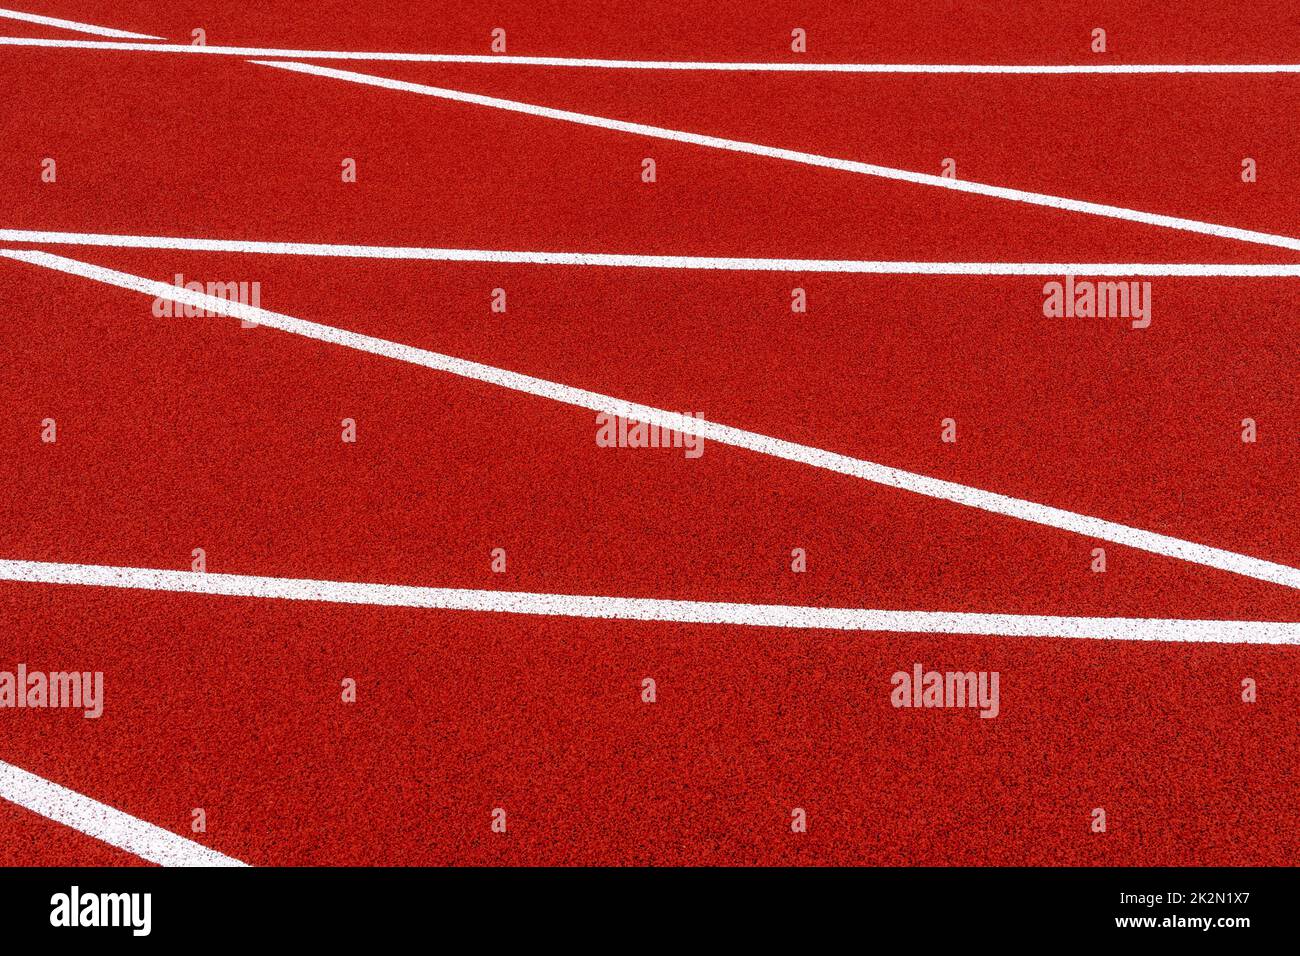 Red running track white lines Stock Photo